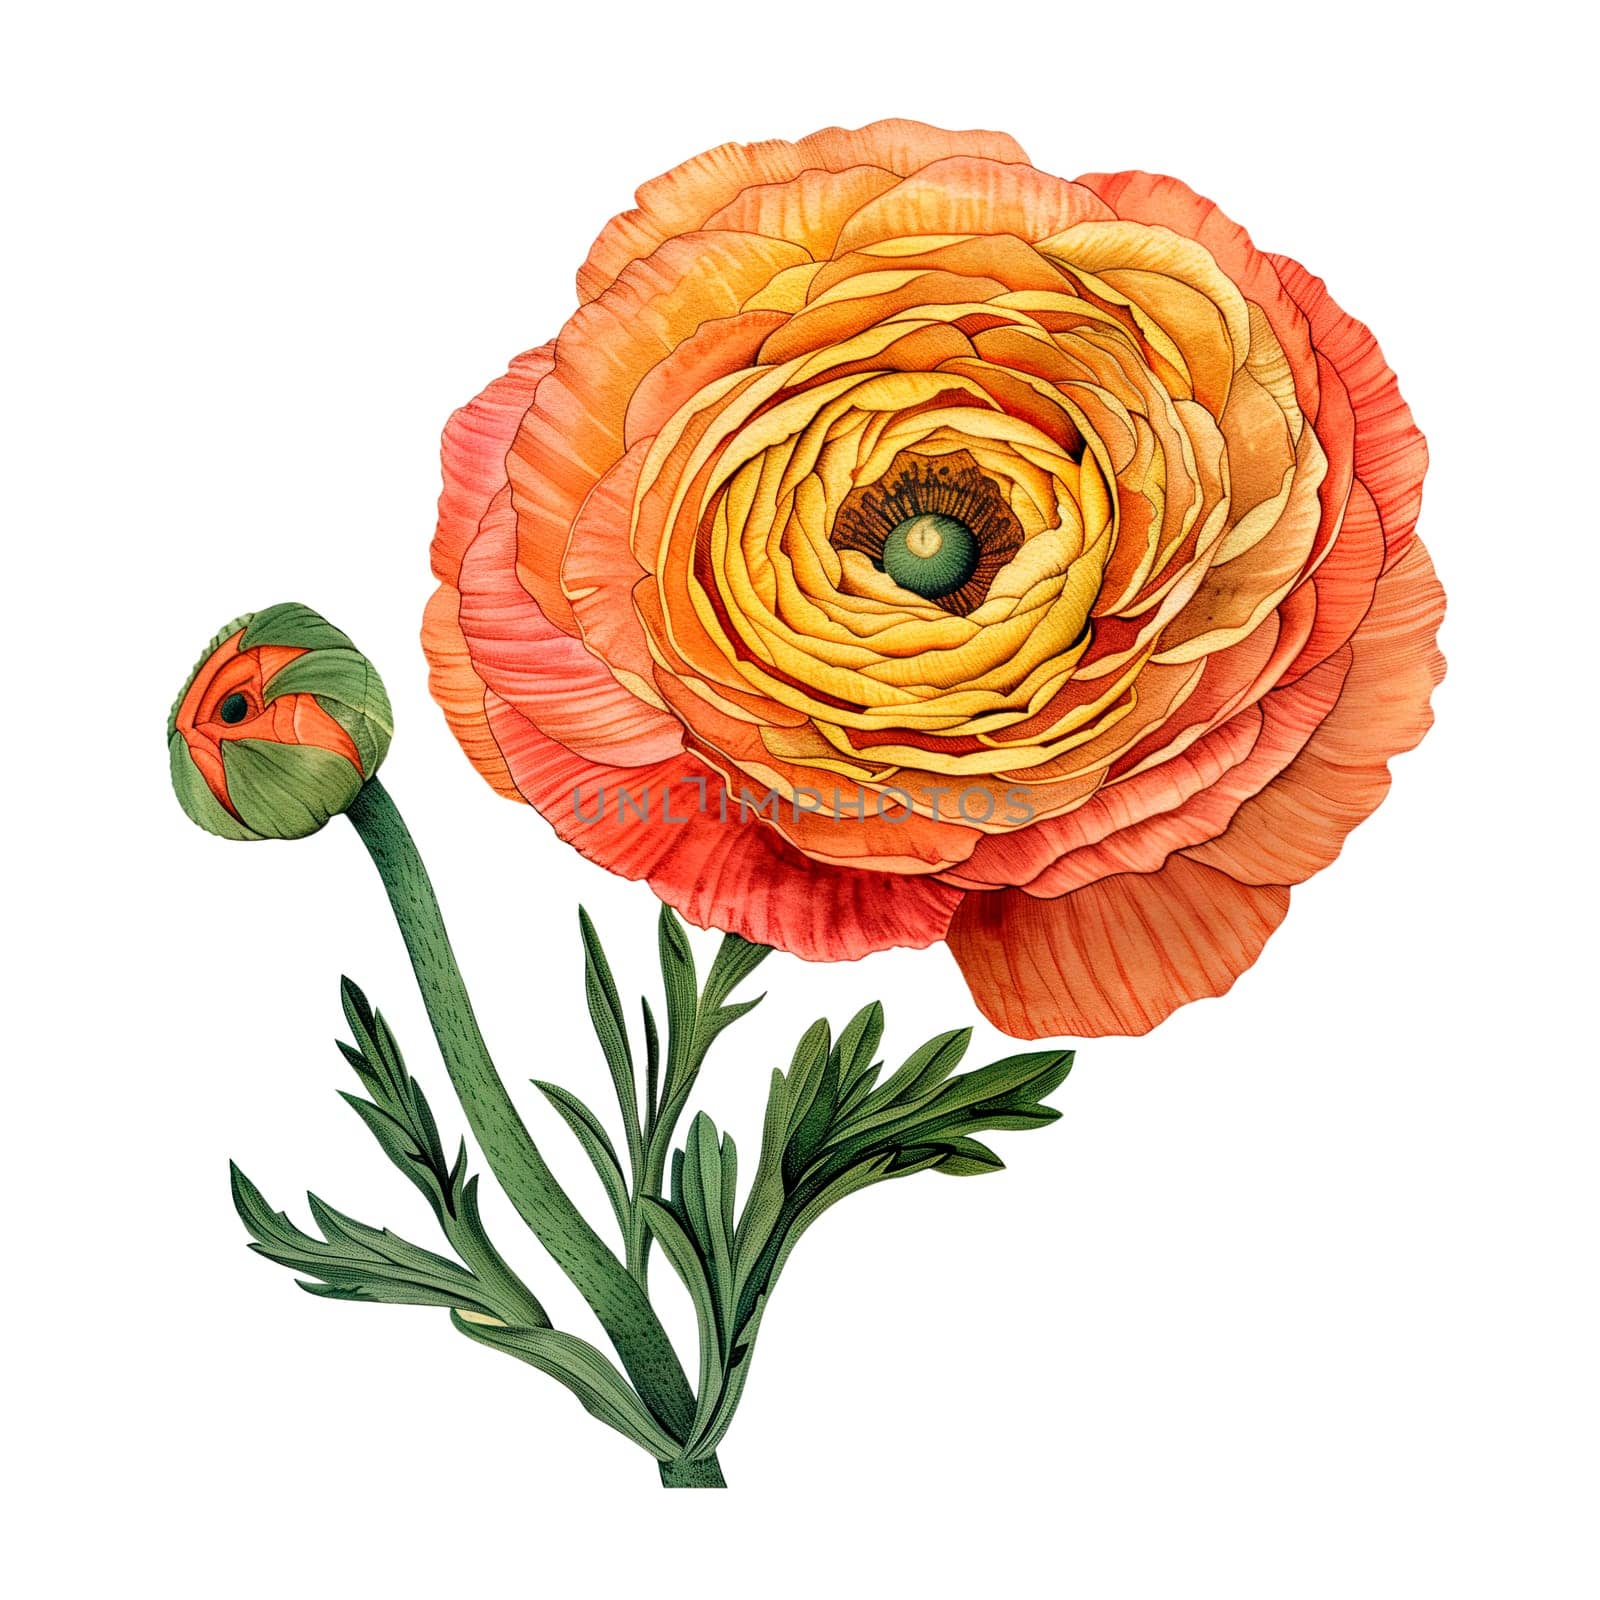 Isolated illustration of colorful ranunculus flower by Dustick